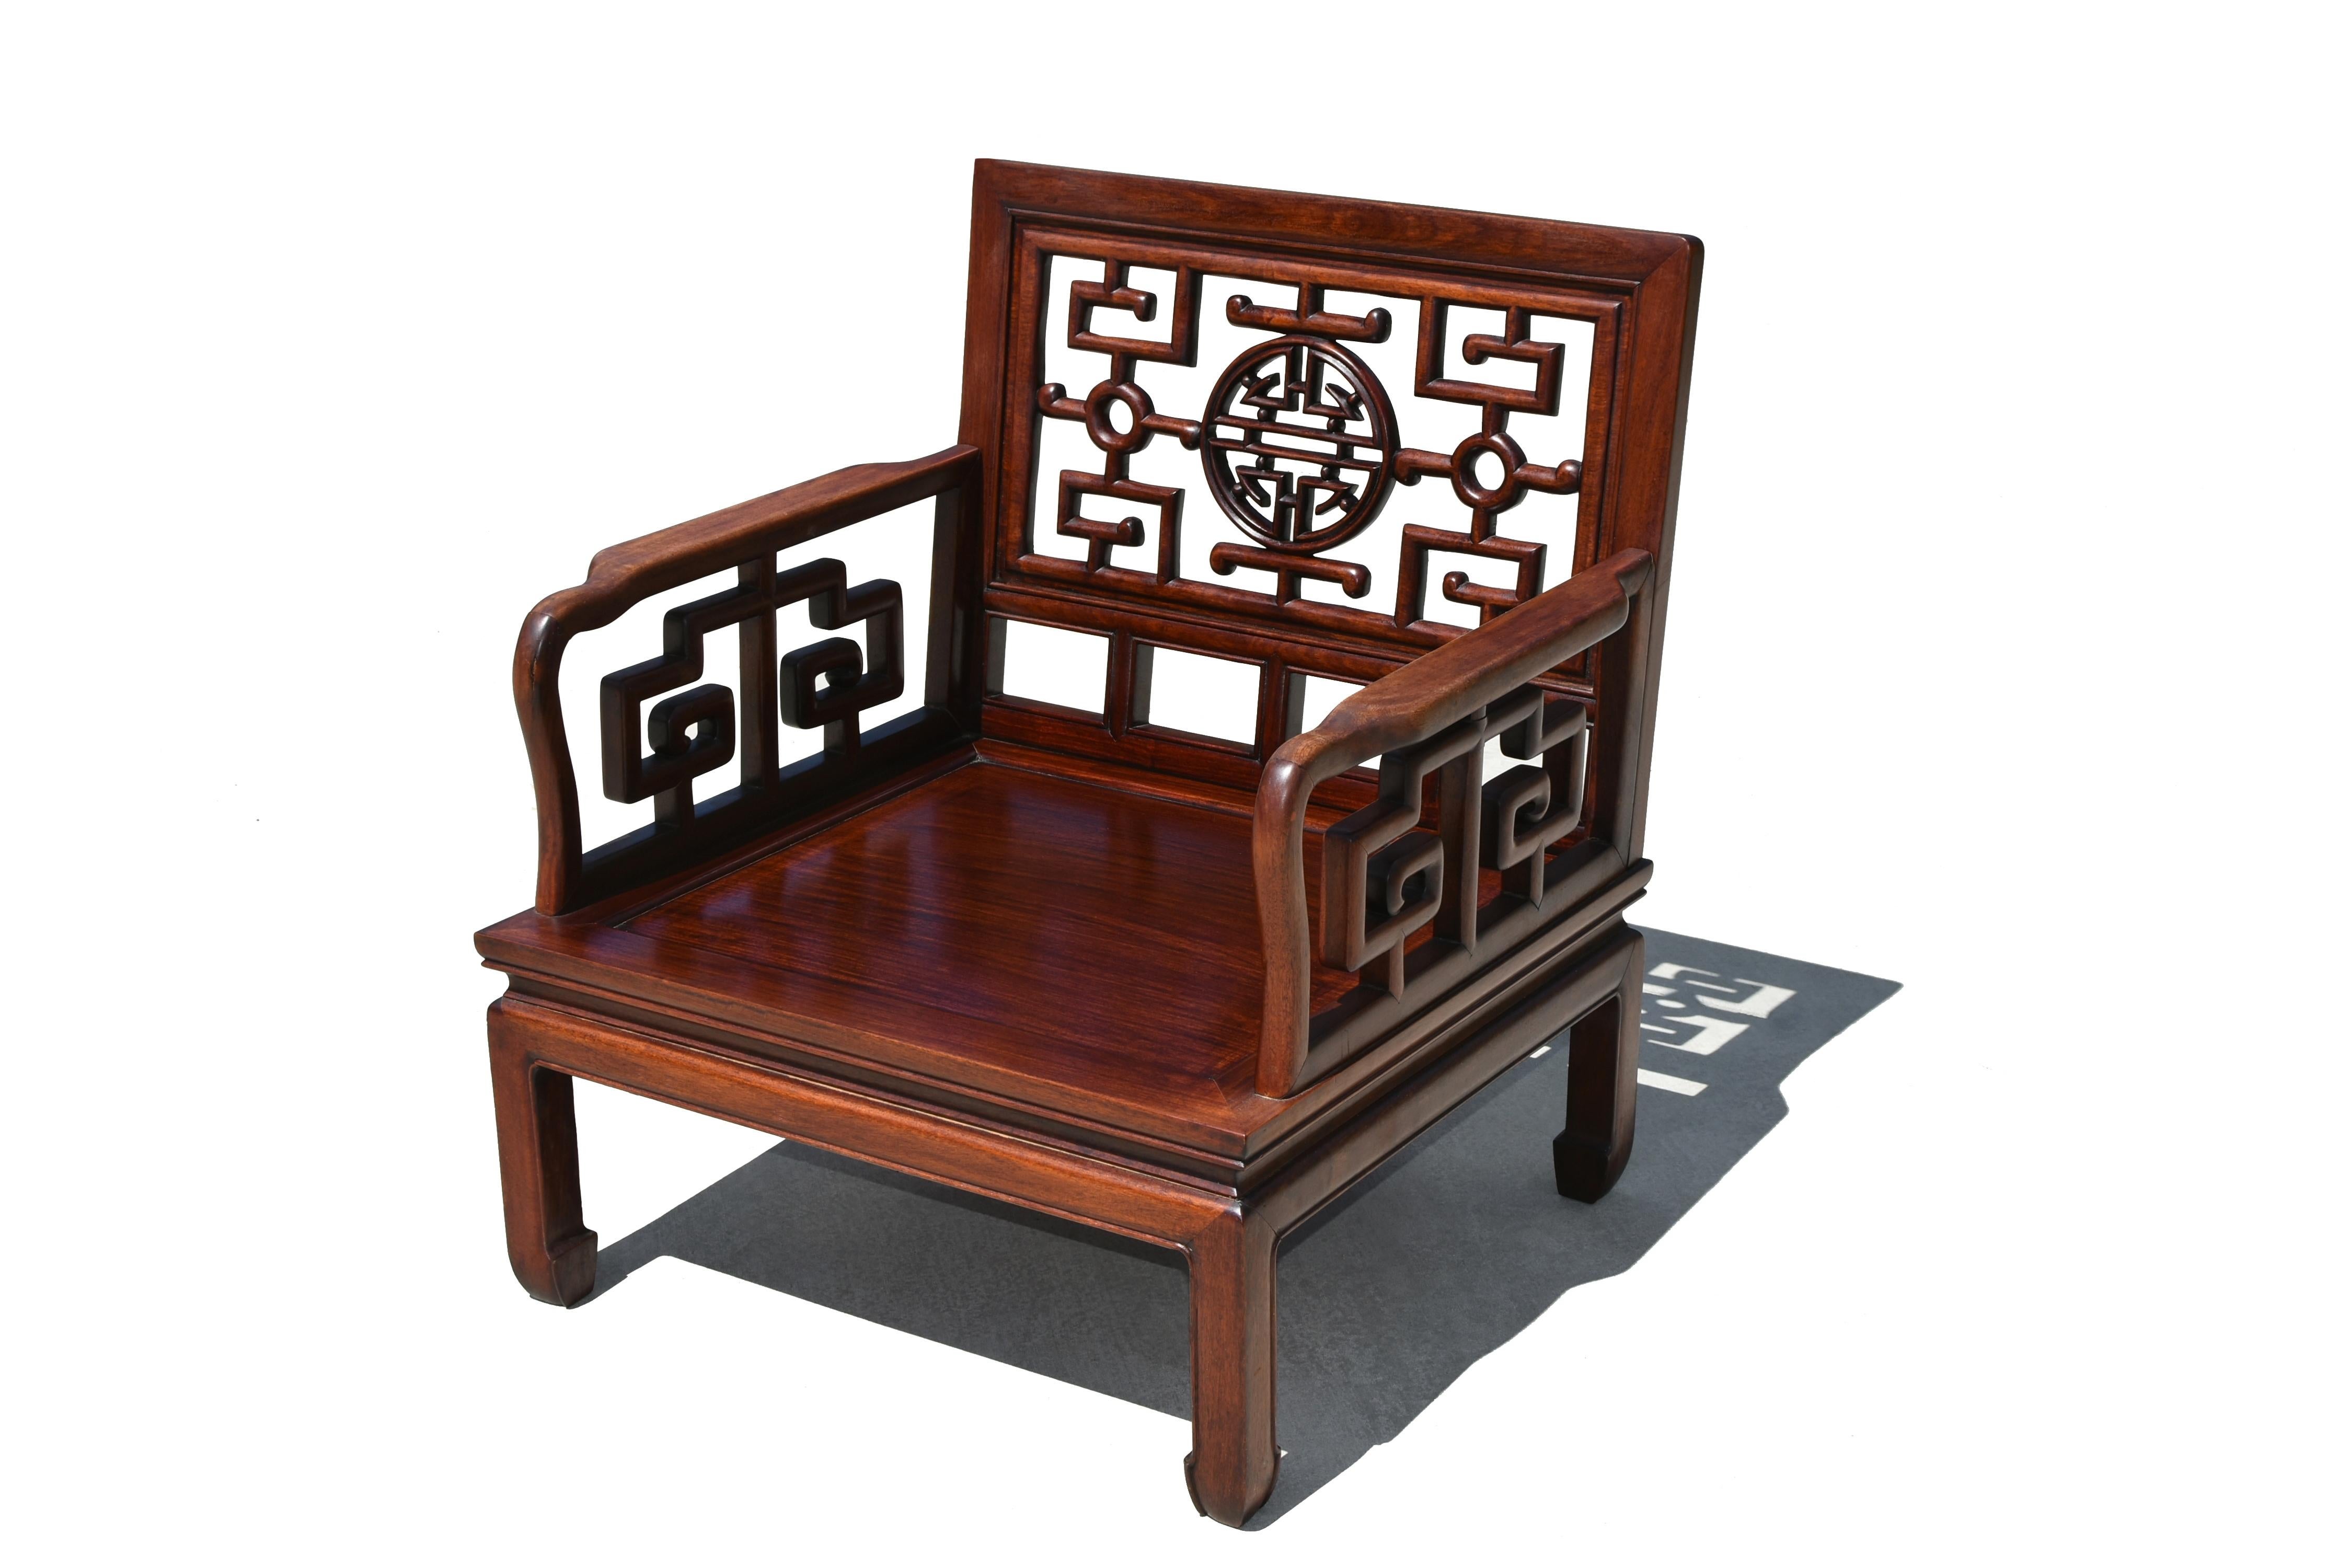 One beautiful solid rosewood meditation chair of the highest quality. Solid construction with tenons and mortises. Back splat finely carved with longevity motifs centered around the medallion of long life. Arms solid and comfortably contoured, with